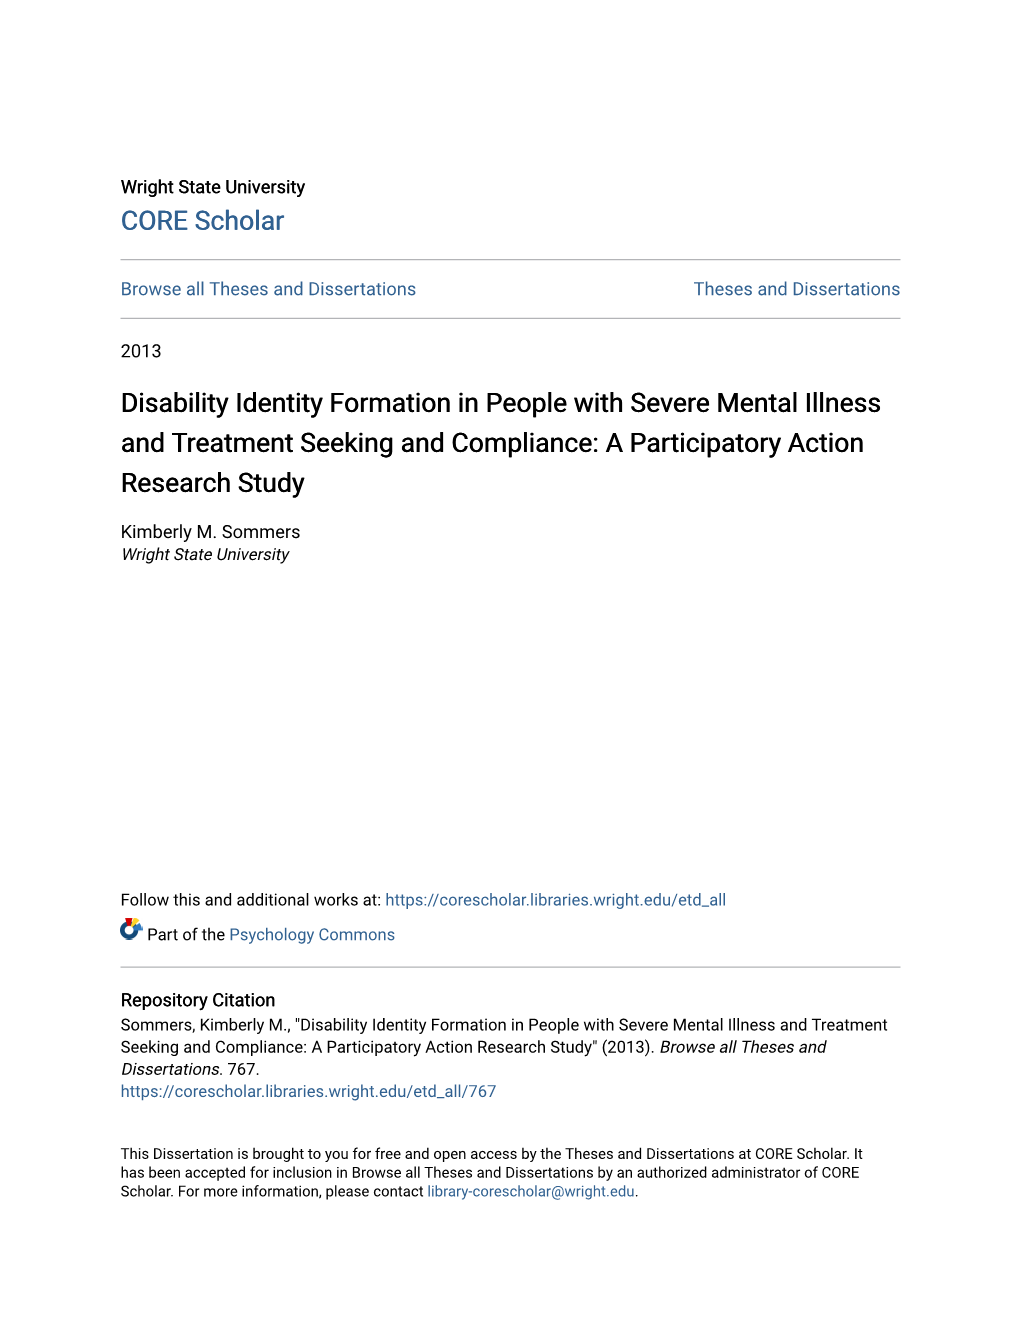 Disability Identity Formation in People with Severe Mental Illness and Treatment Seeking and Compliance: a Participatory Action Research Study